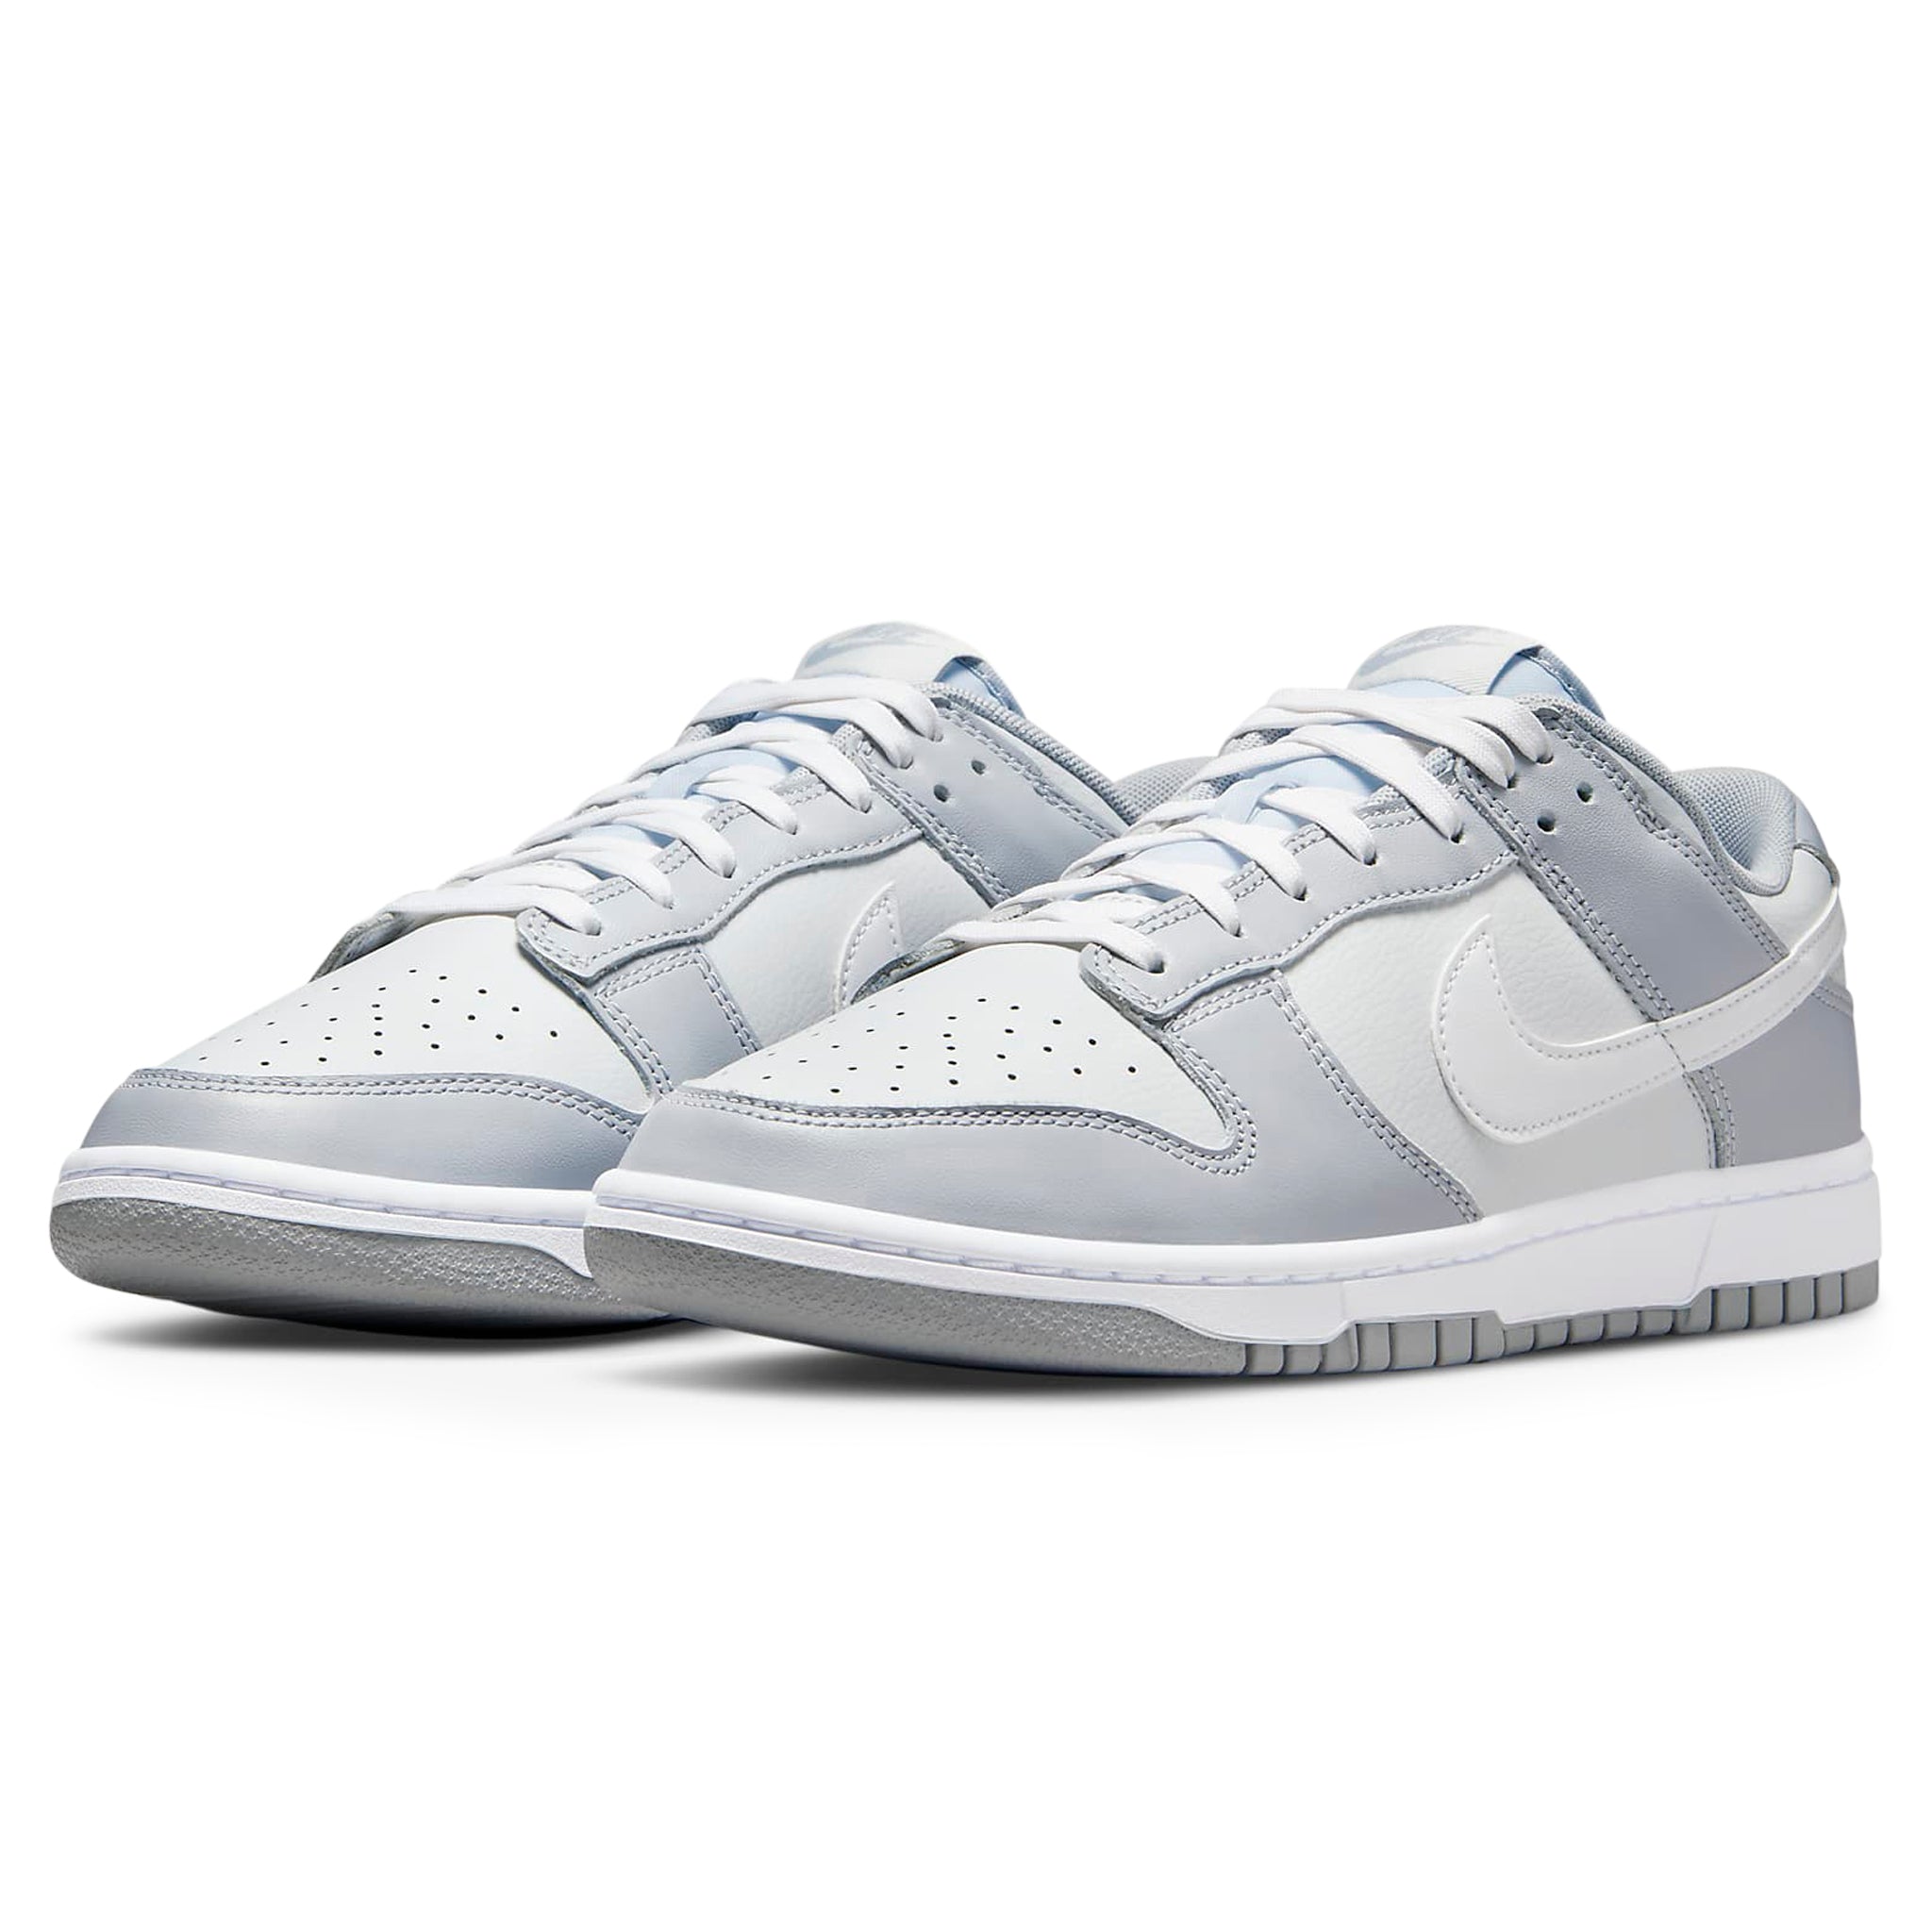 Front side view of Nike Dunk Low Two Tone Grey DJ6188-001